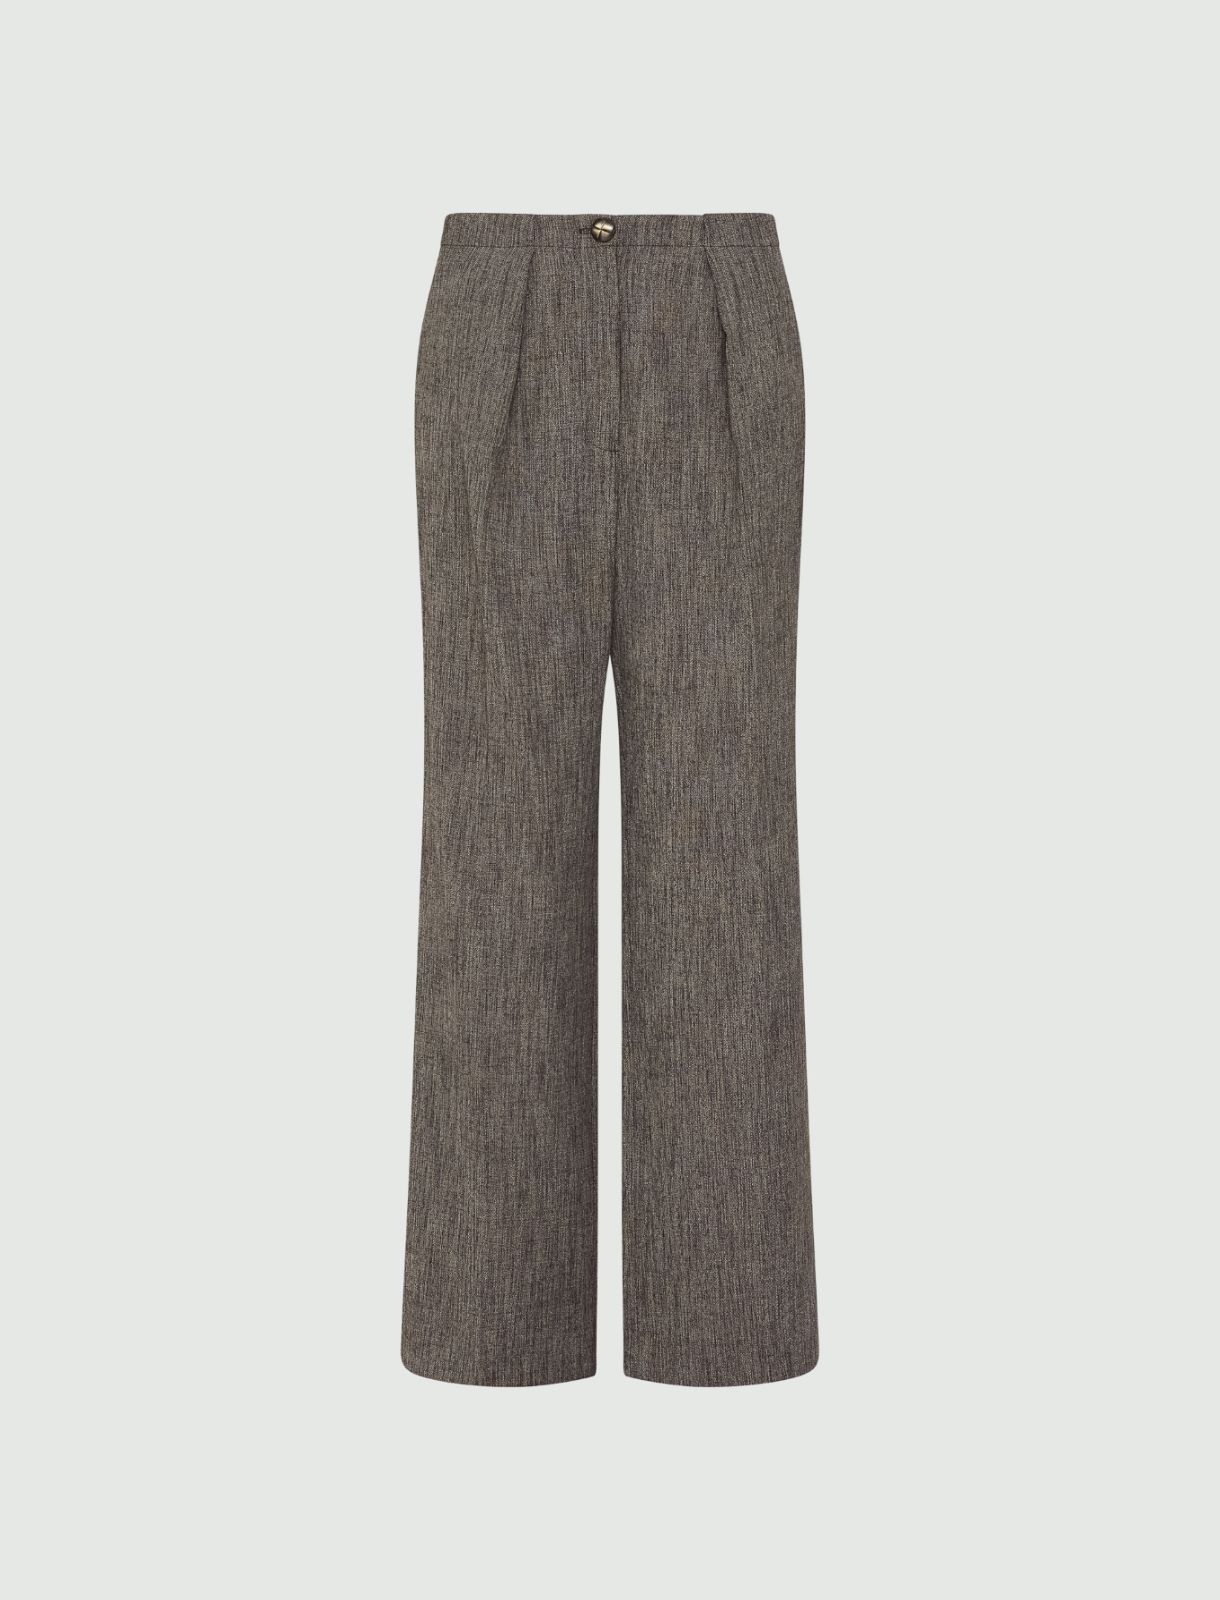 Grisaille trousers - Brown - Marella - 5